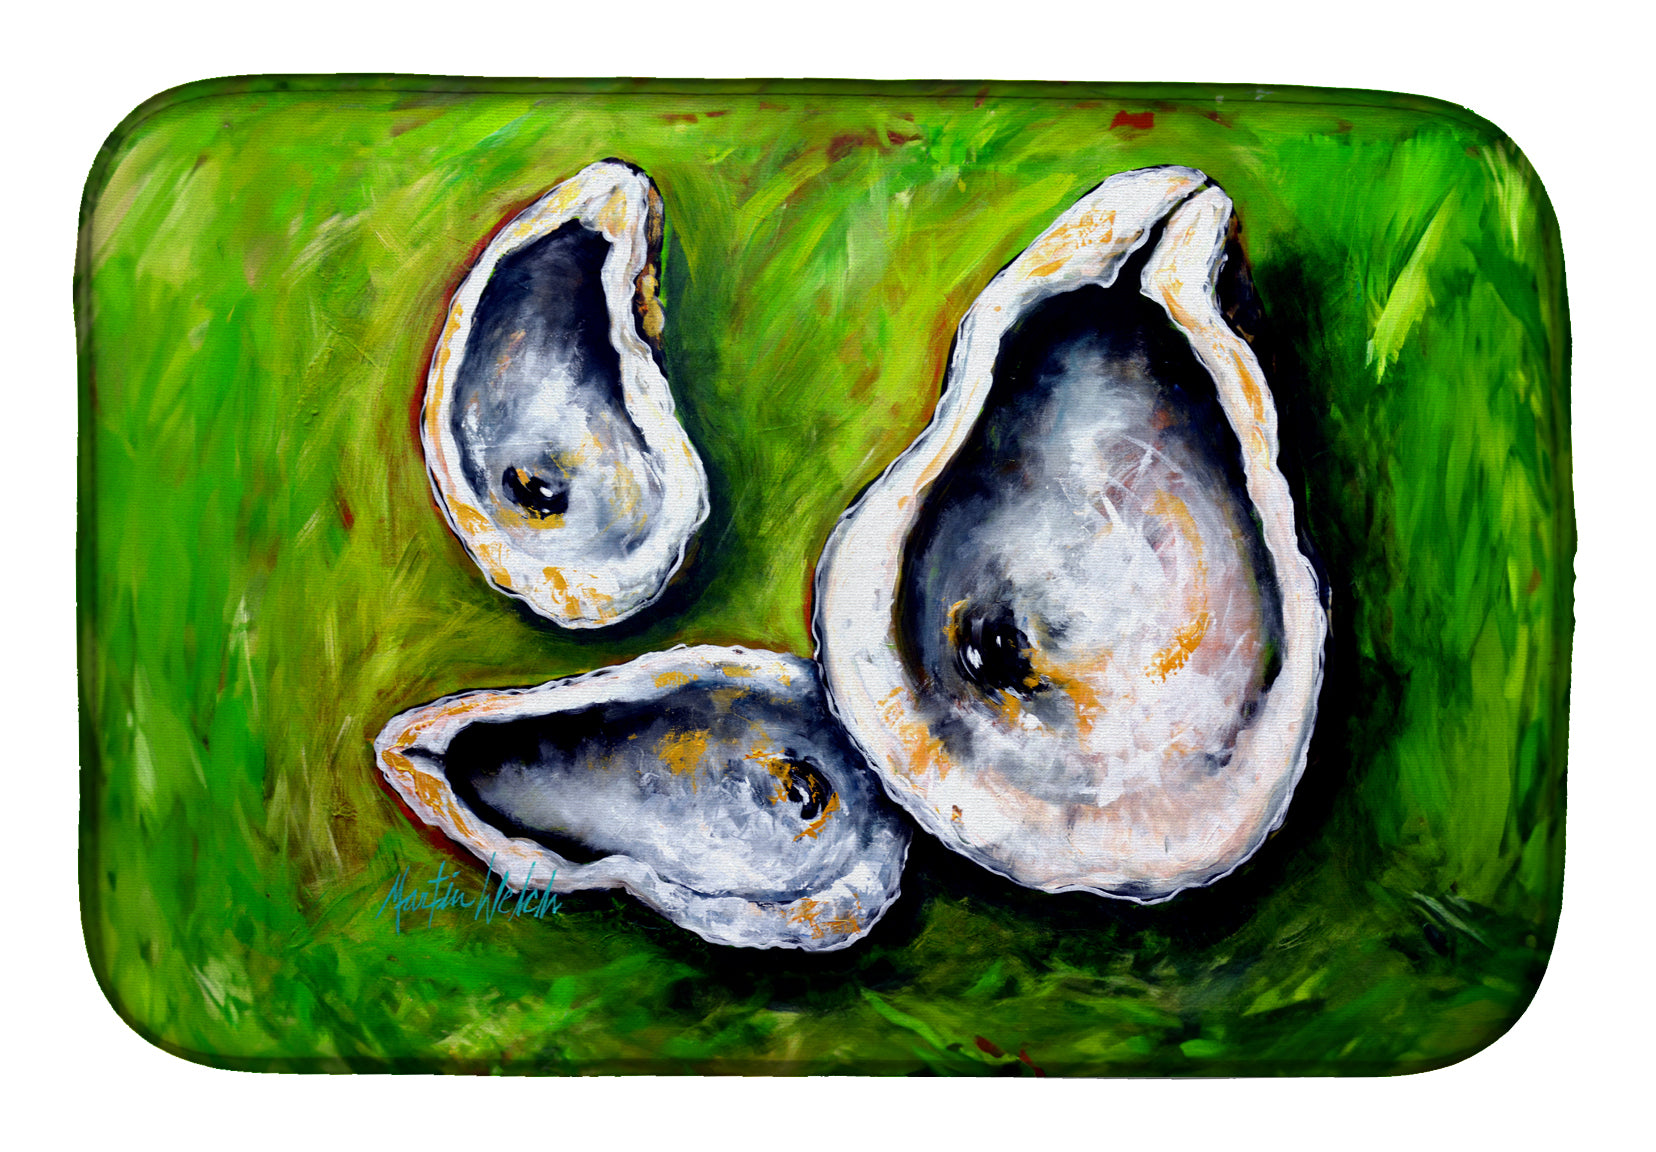 Buy this All Shucked Oysters Dish Drying Mat